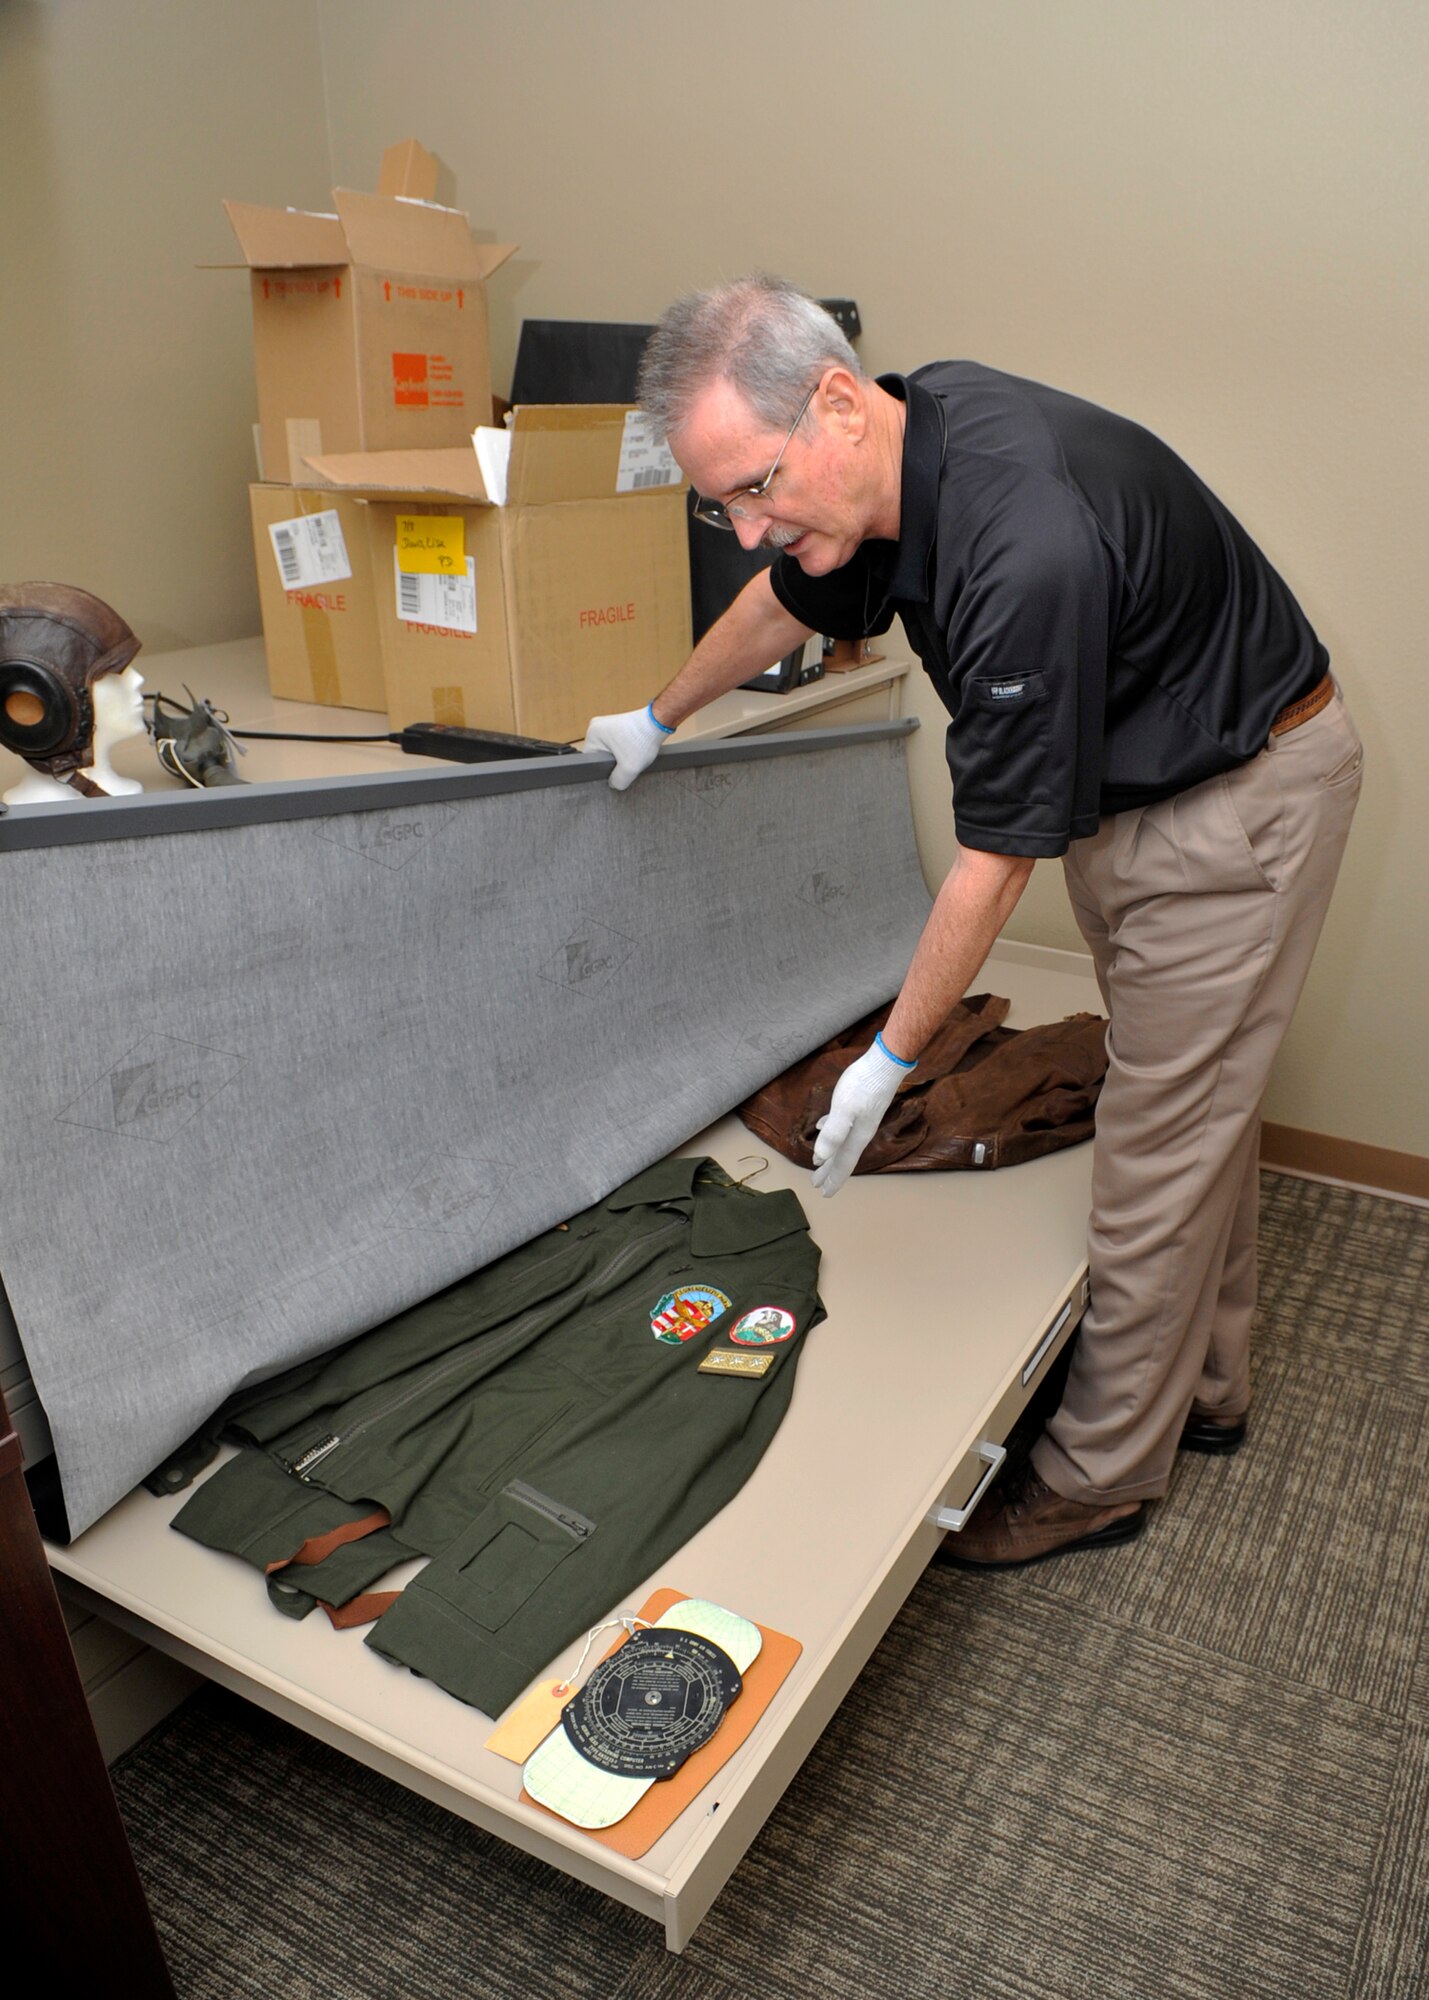 Richard Griset, 56th Fighter Wing historian, shows an old pilot uniform that is part of a preservation collection on Luke Air Force Base. 

Use both if you have room, or this one for sure.
